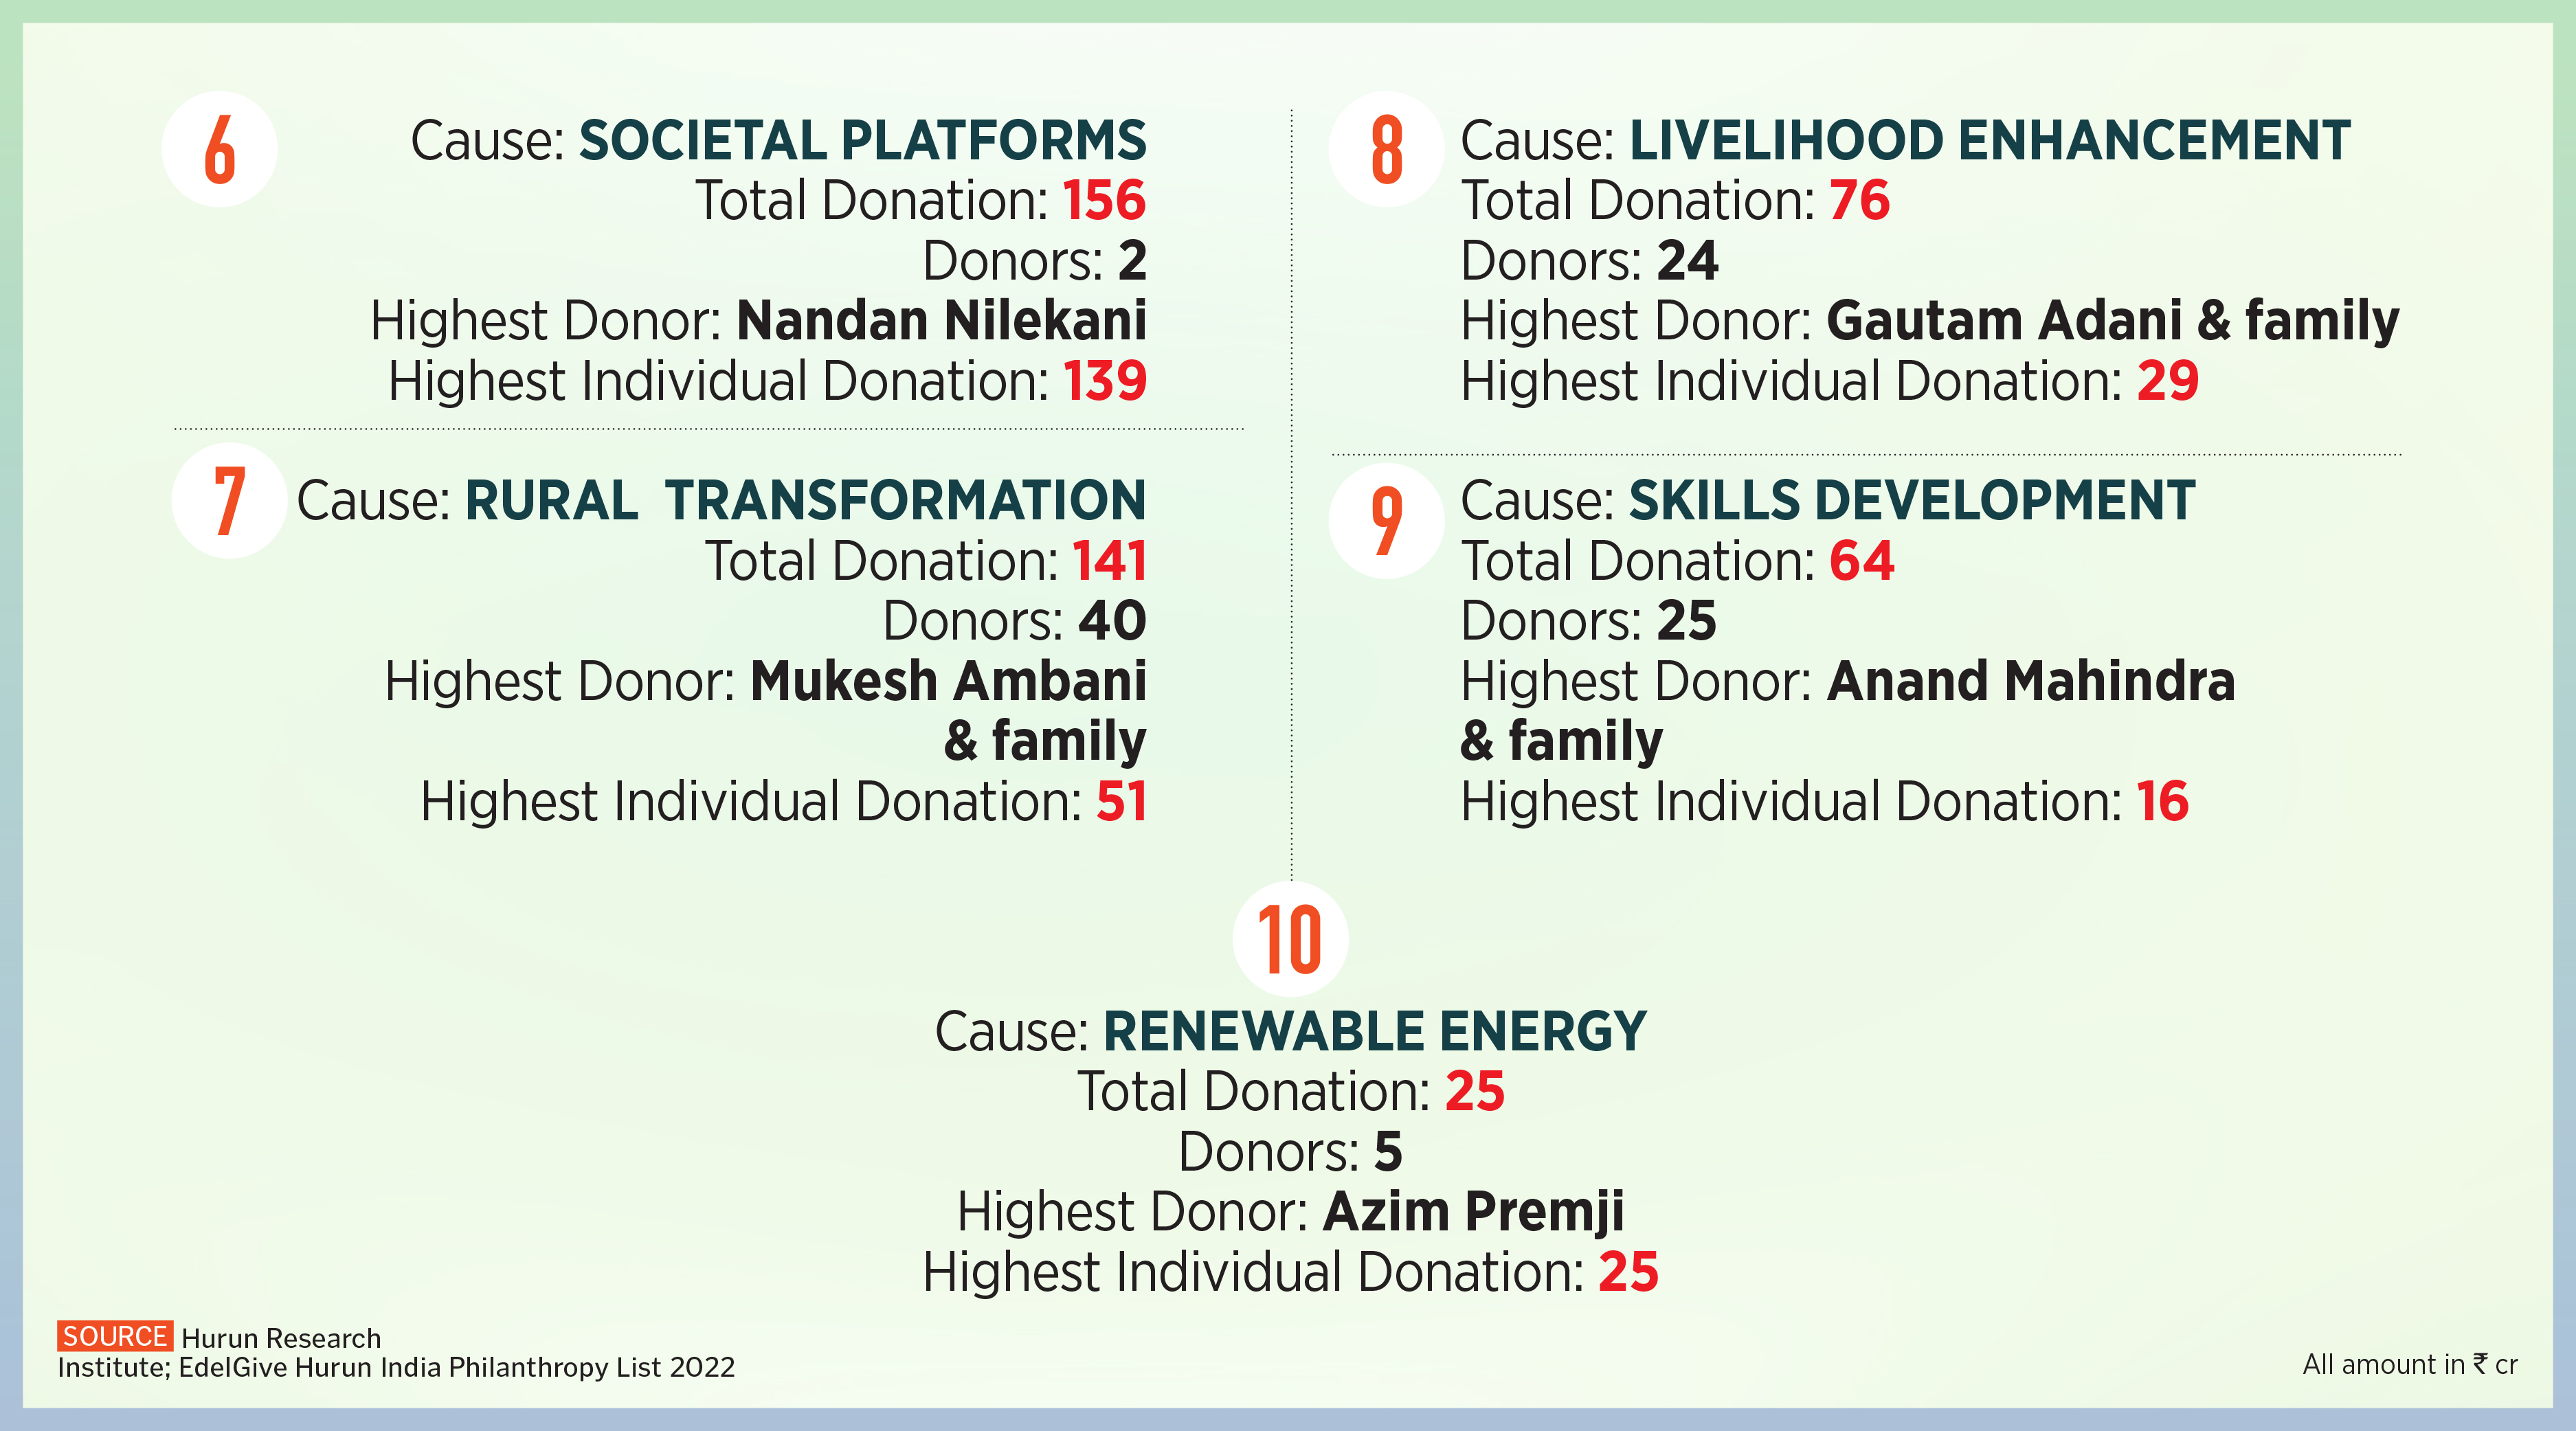 Why Mindtree co-founders Subroto Bagchi and NS Parthasarathy are betting big on health care philanthropy